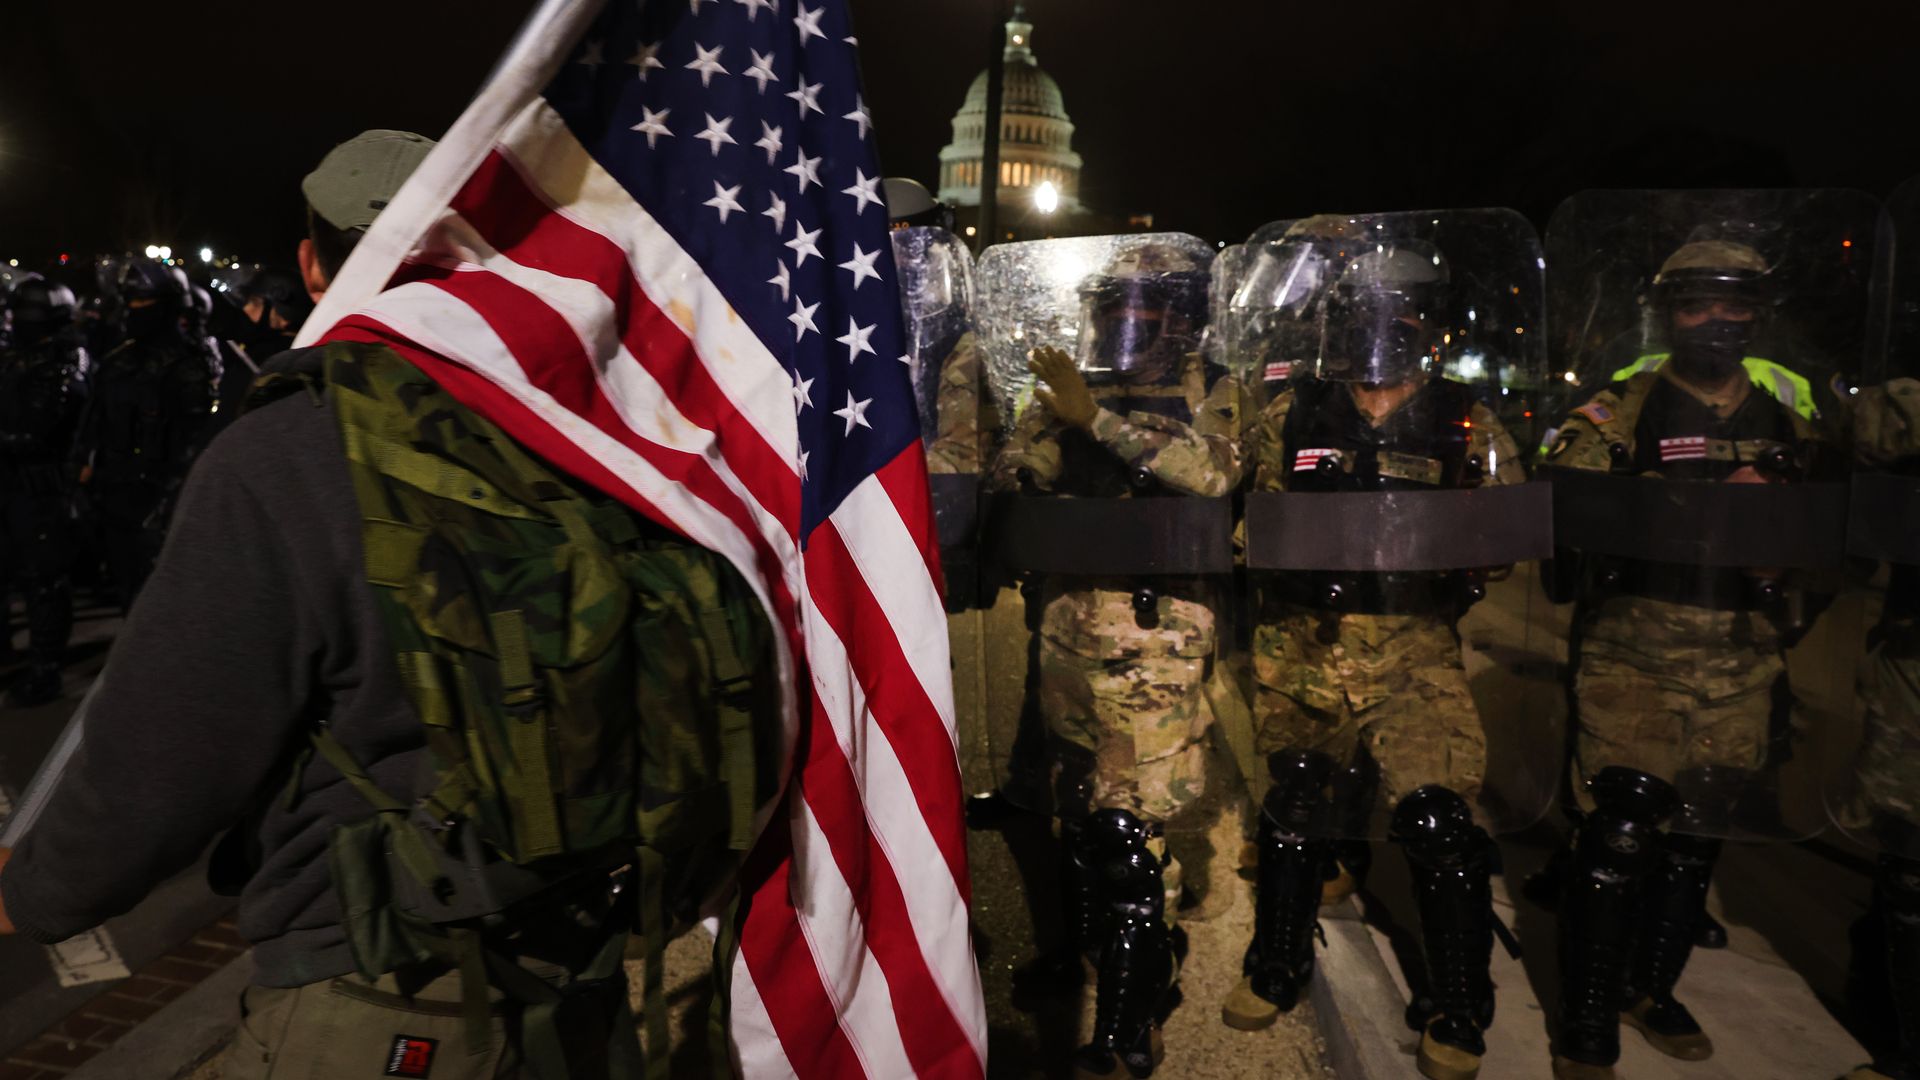  Members of the National Guard and the Washington D.C. police keep a small group of pro-Trump demonstrators away from the Capital after the insurrection o January 06, 2021 in Washington, DC. 